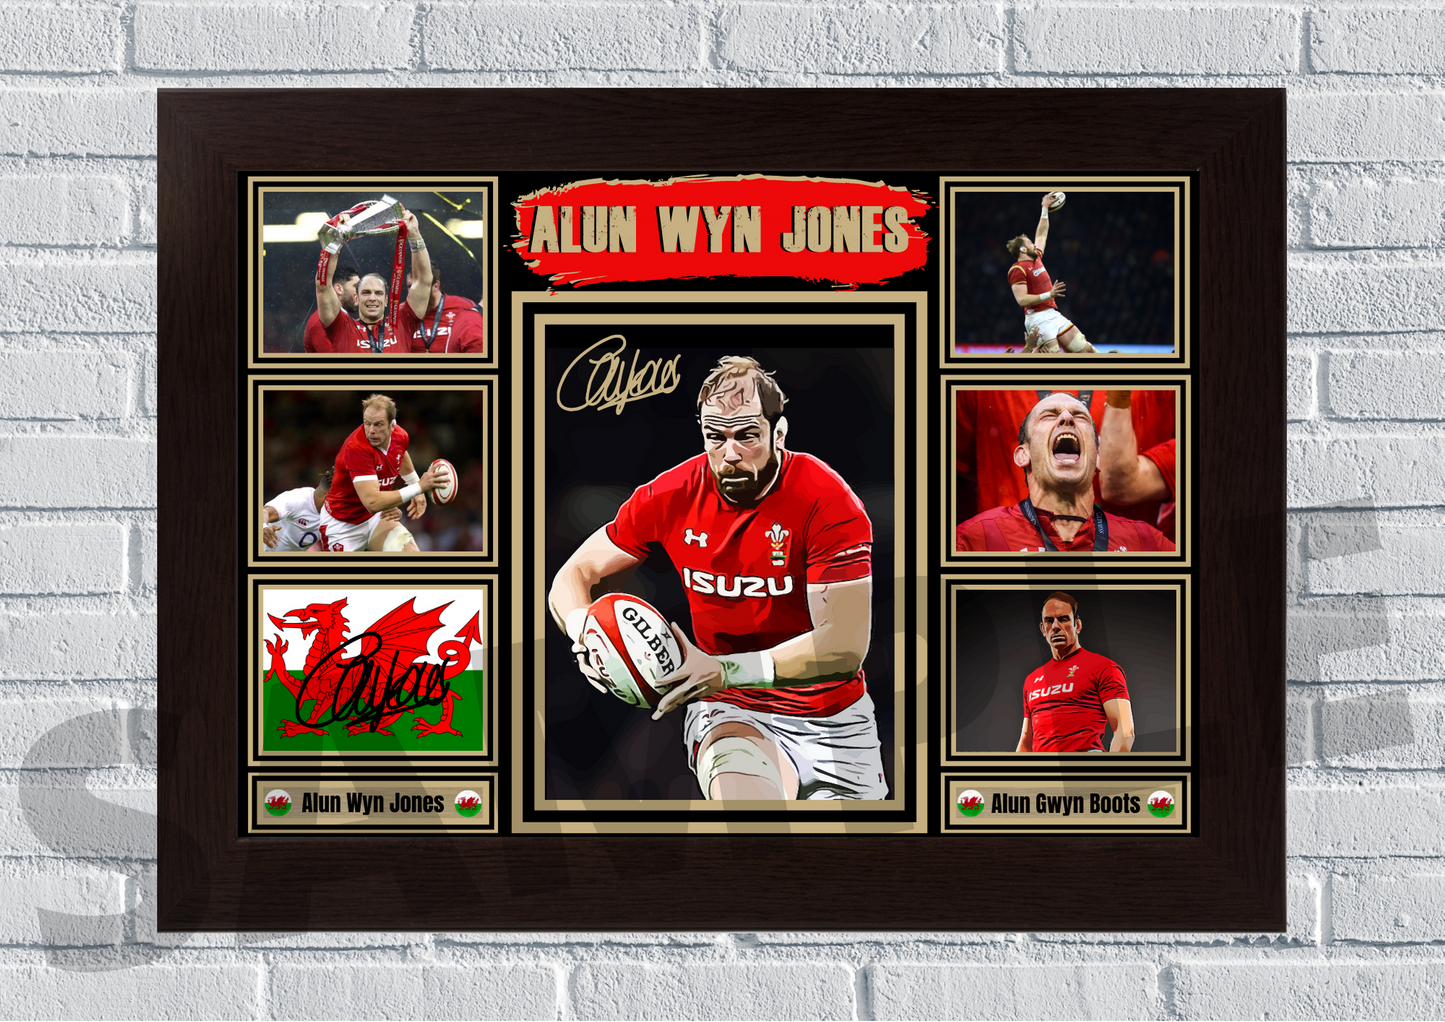 Alun Wyn Jones Wales (Rugby) Collectable/Memorabilia #59 - Signed print